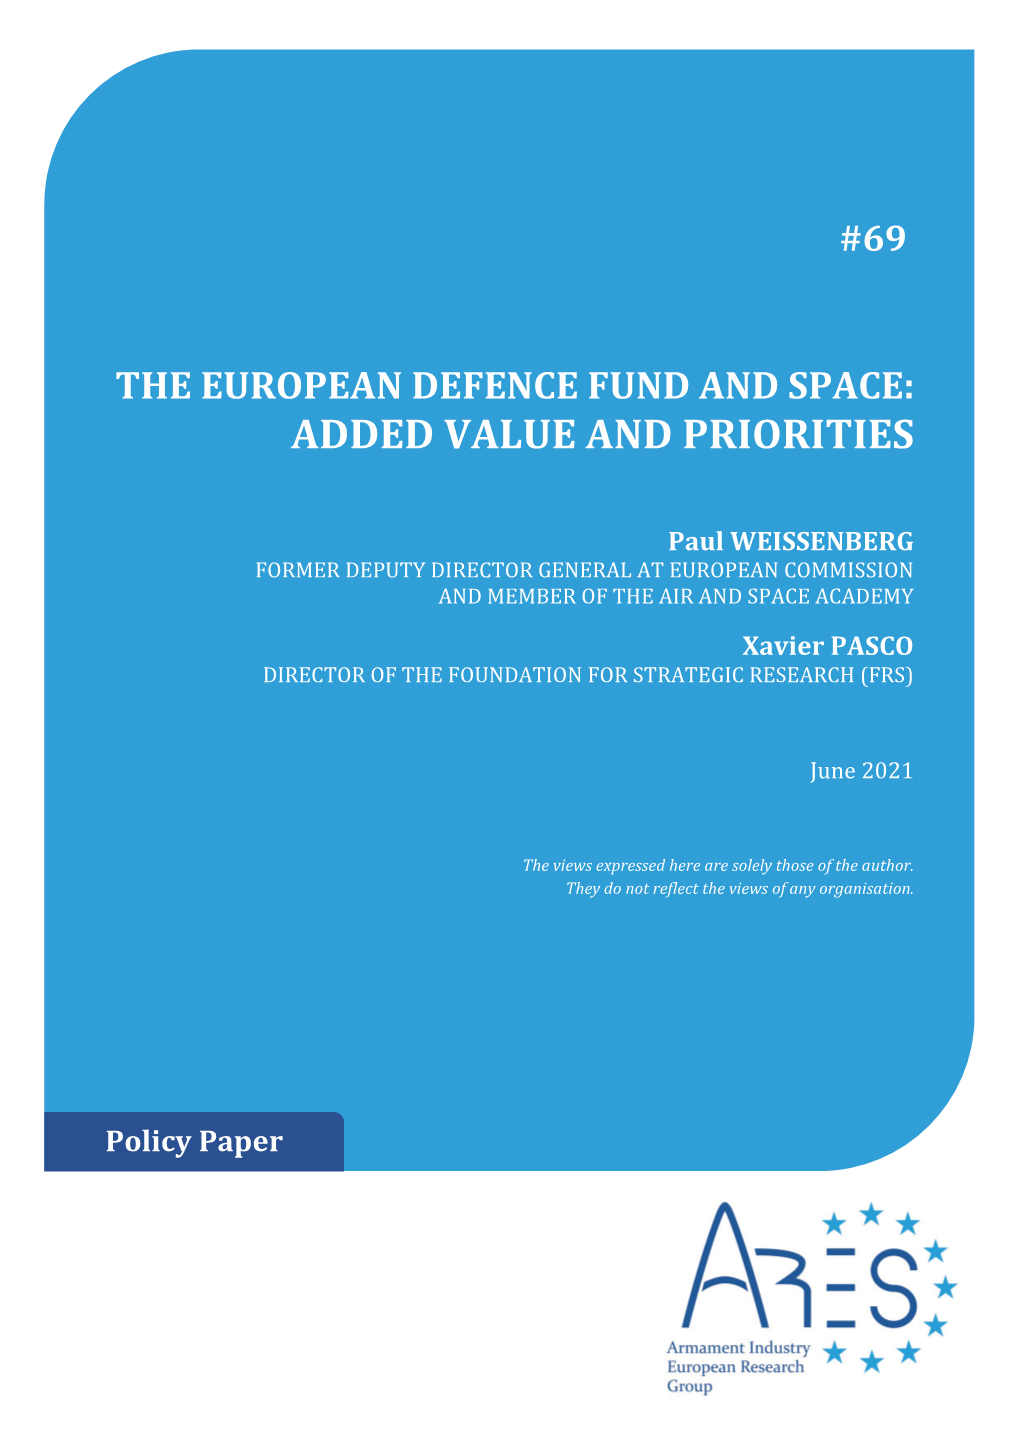 The European Defence Fund and Space: Added Values and Priorities